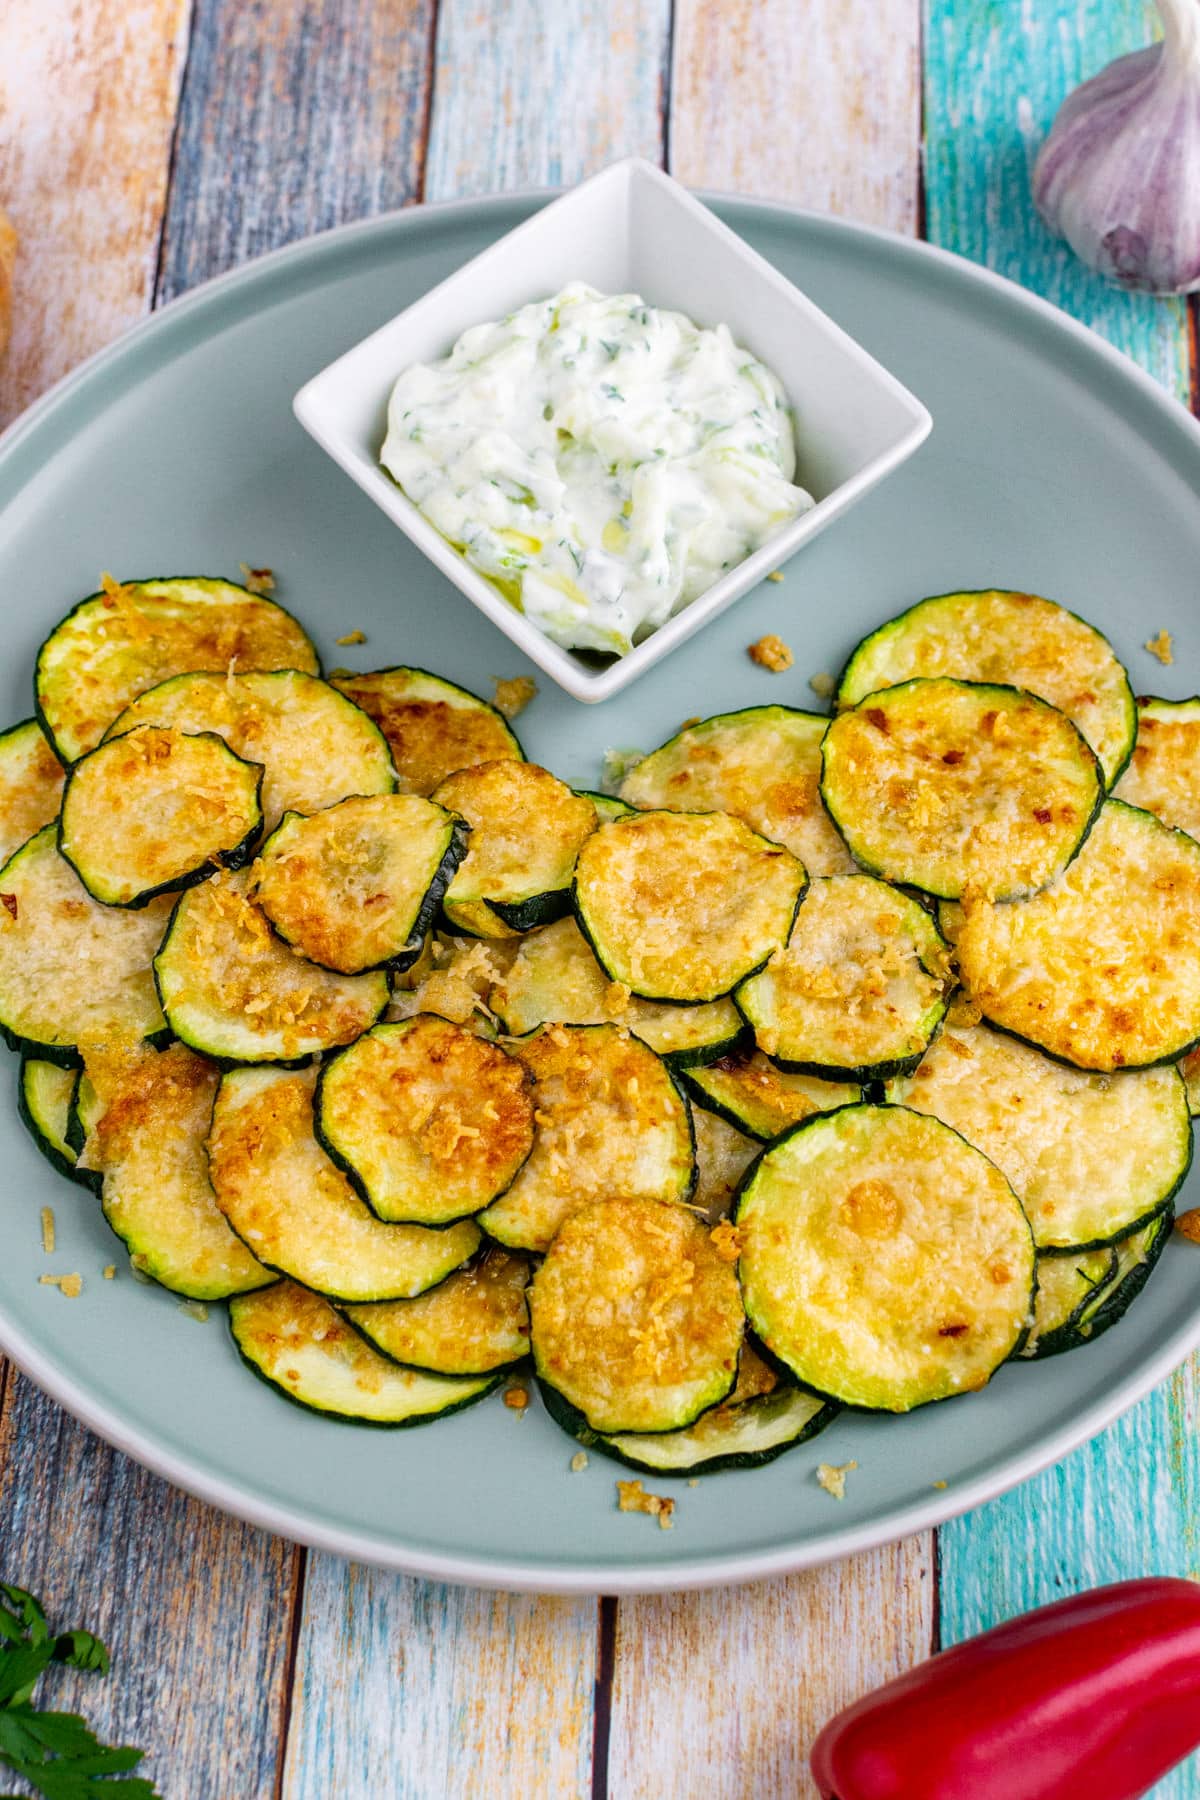 Plate with parmesan zucchini chips and tzatziki sauce.